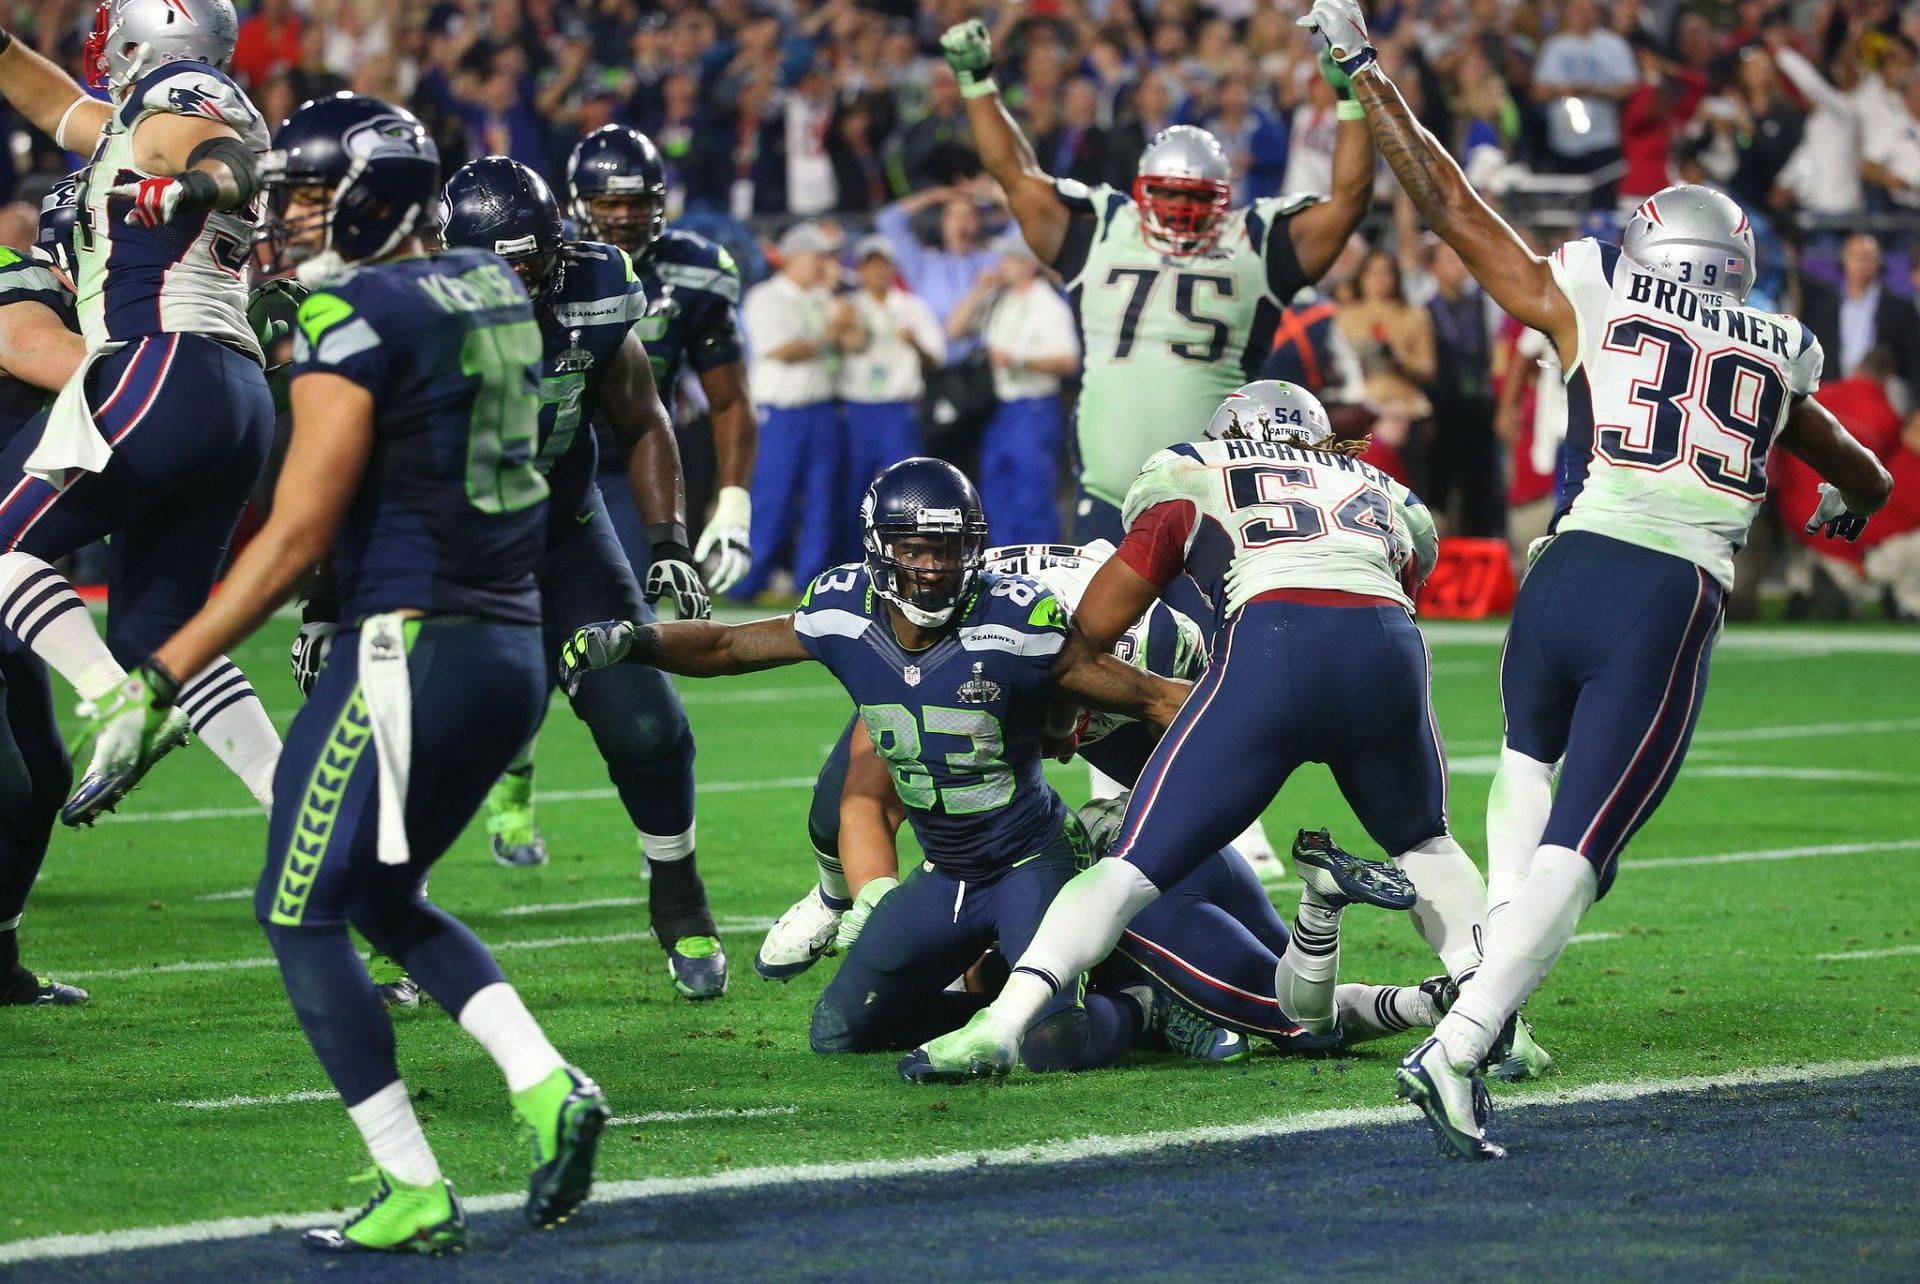 New England Patriots vs Seattle Seahawks at the 2015 Super Bowl